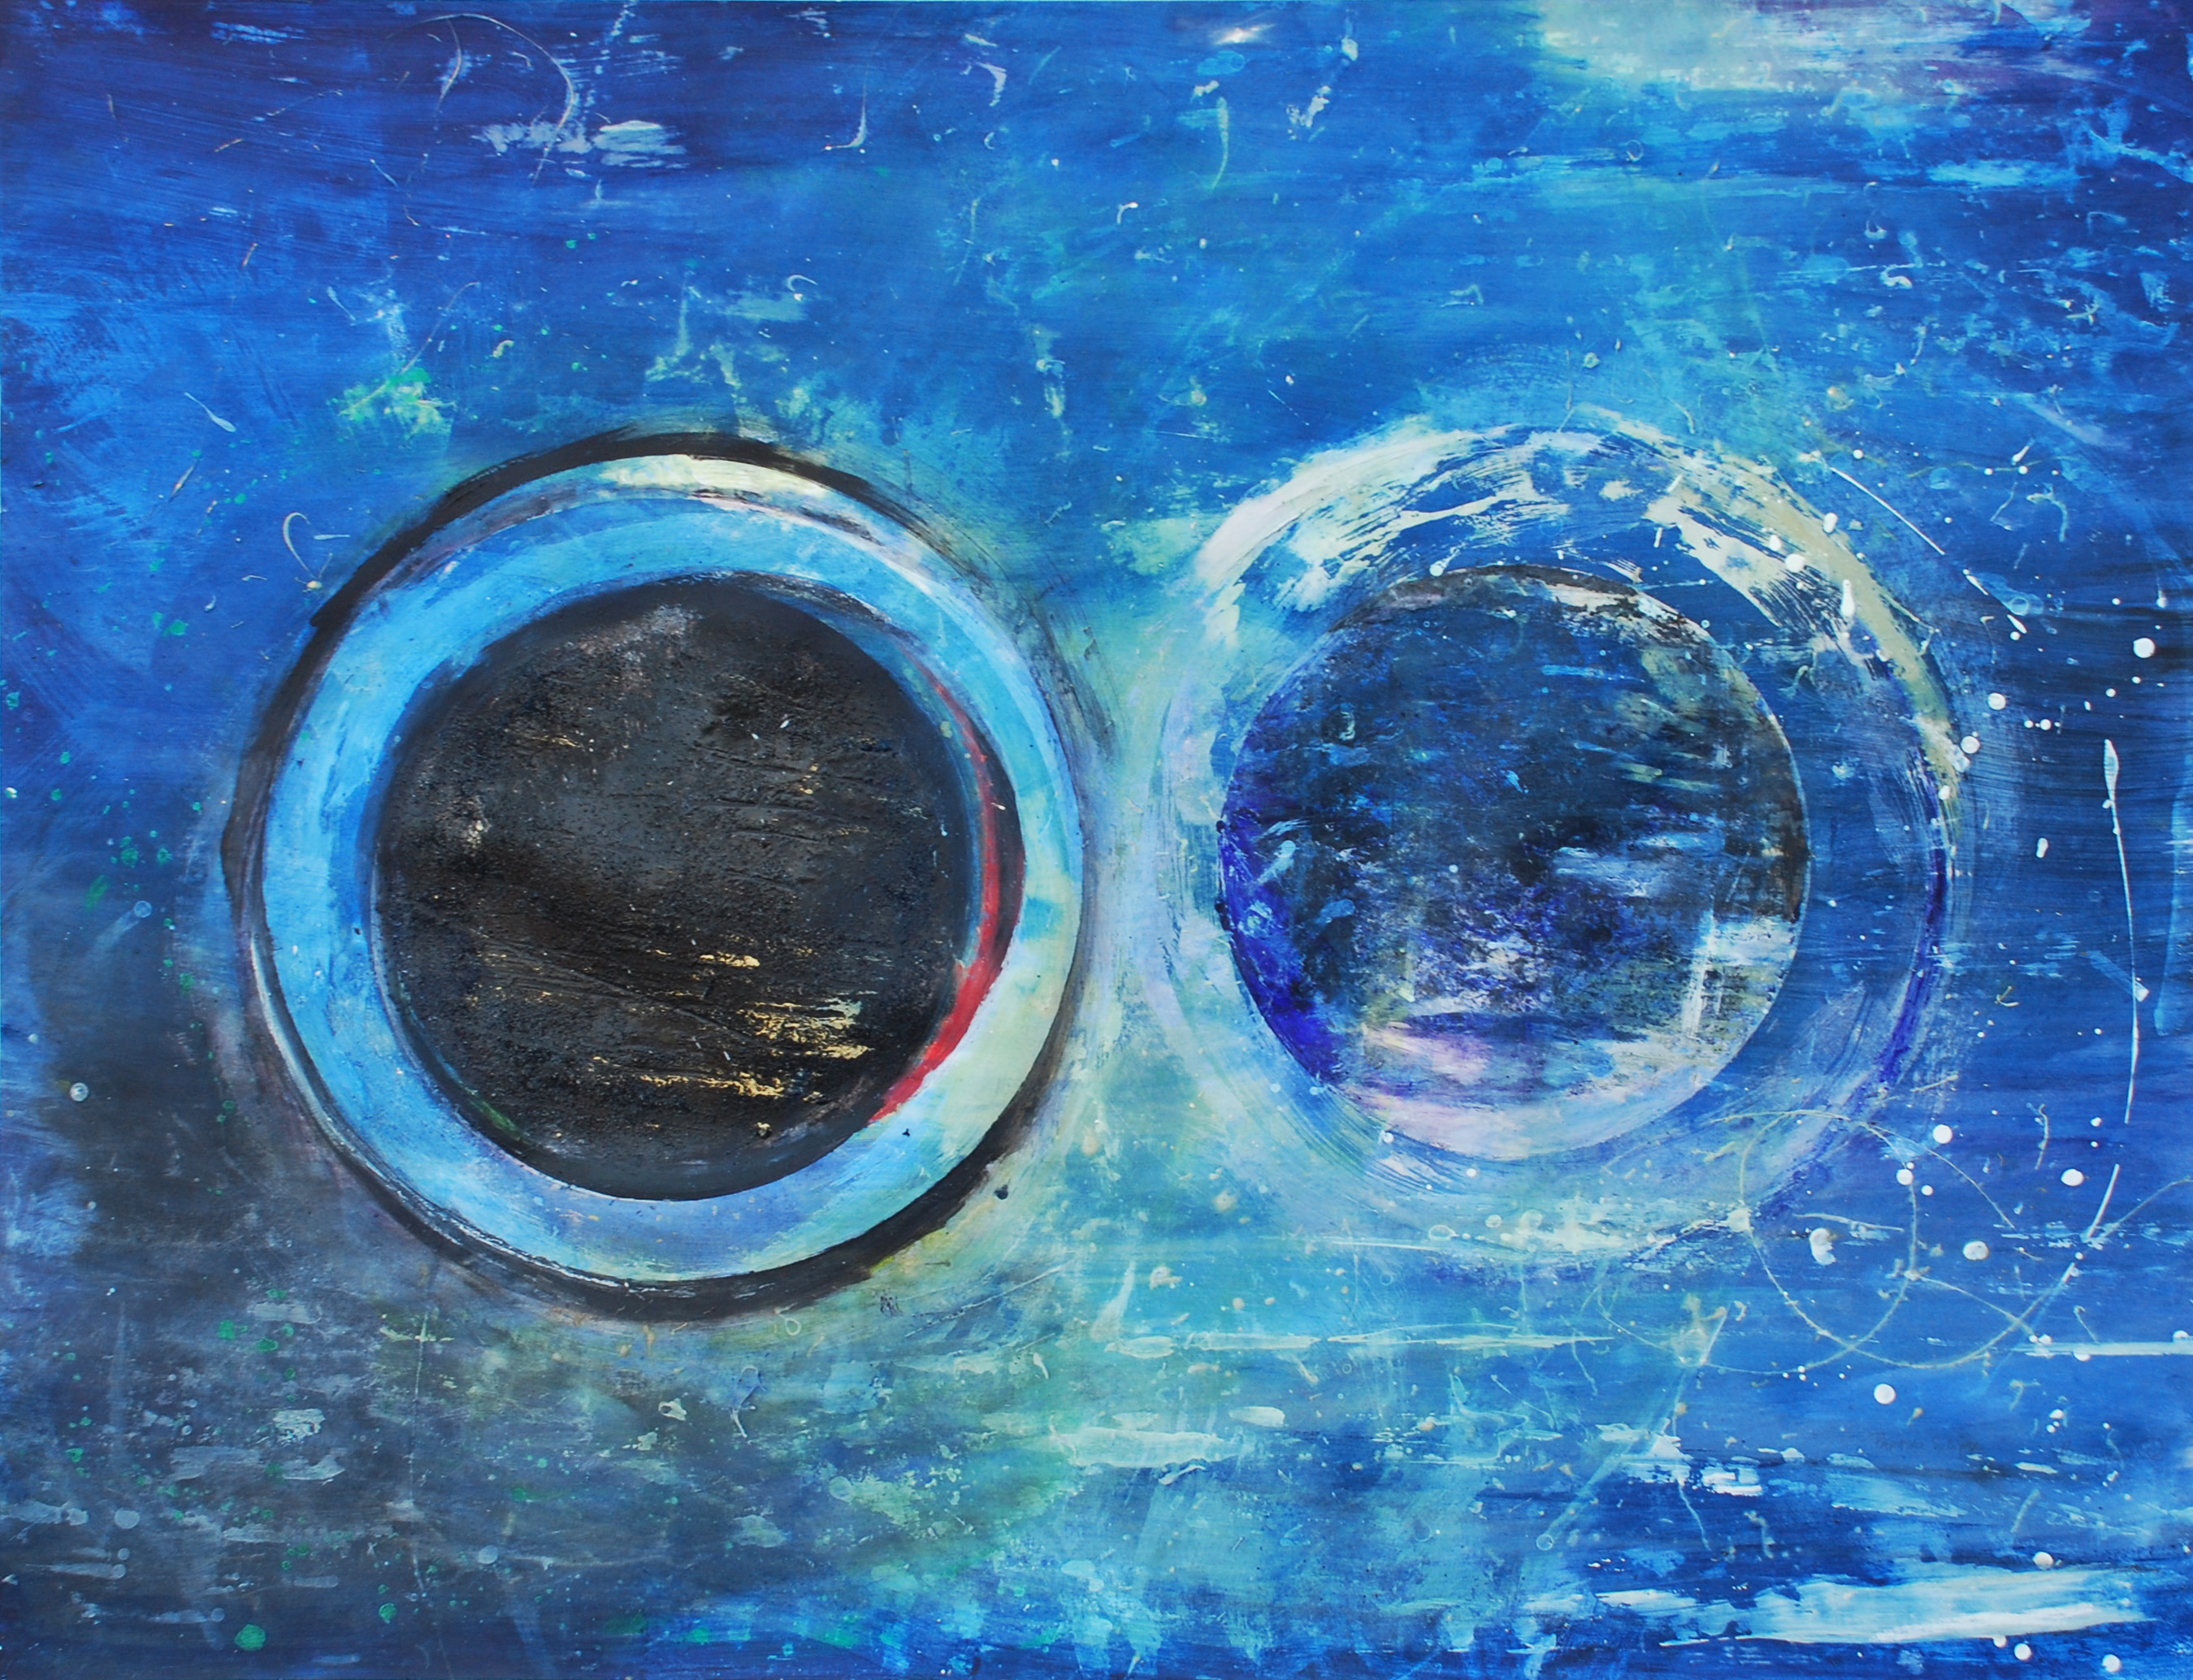 Partial eclipse16mb 38x50inches mixed media on paper ljvv2r